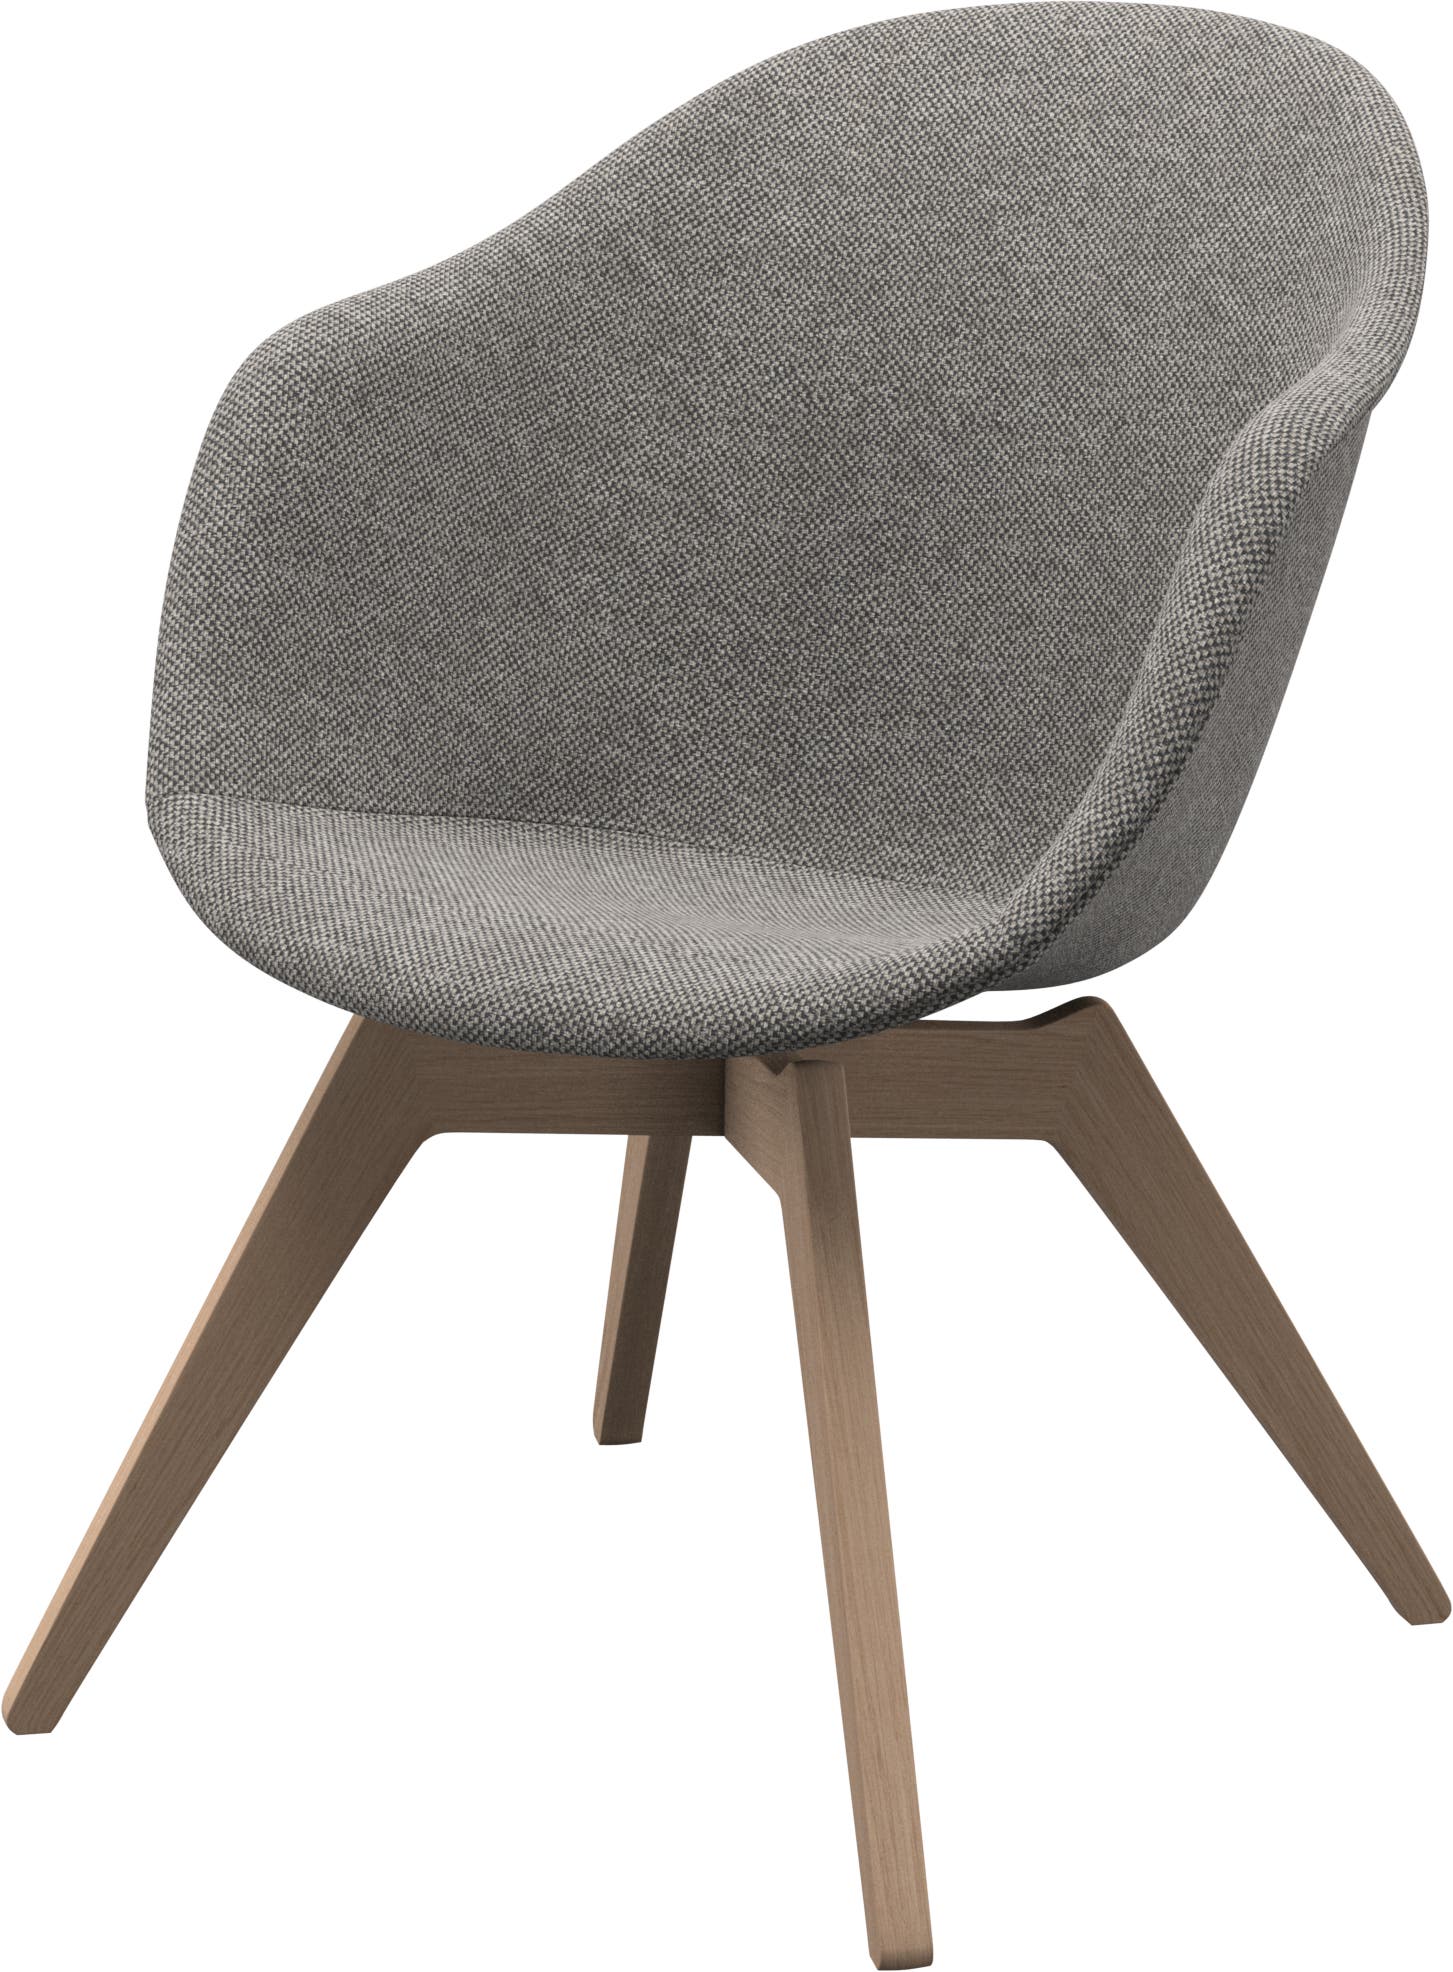 Adelaide lounge chair